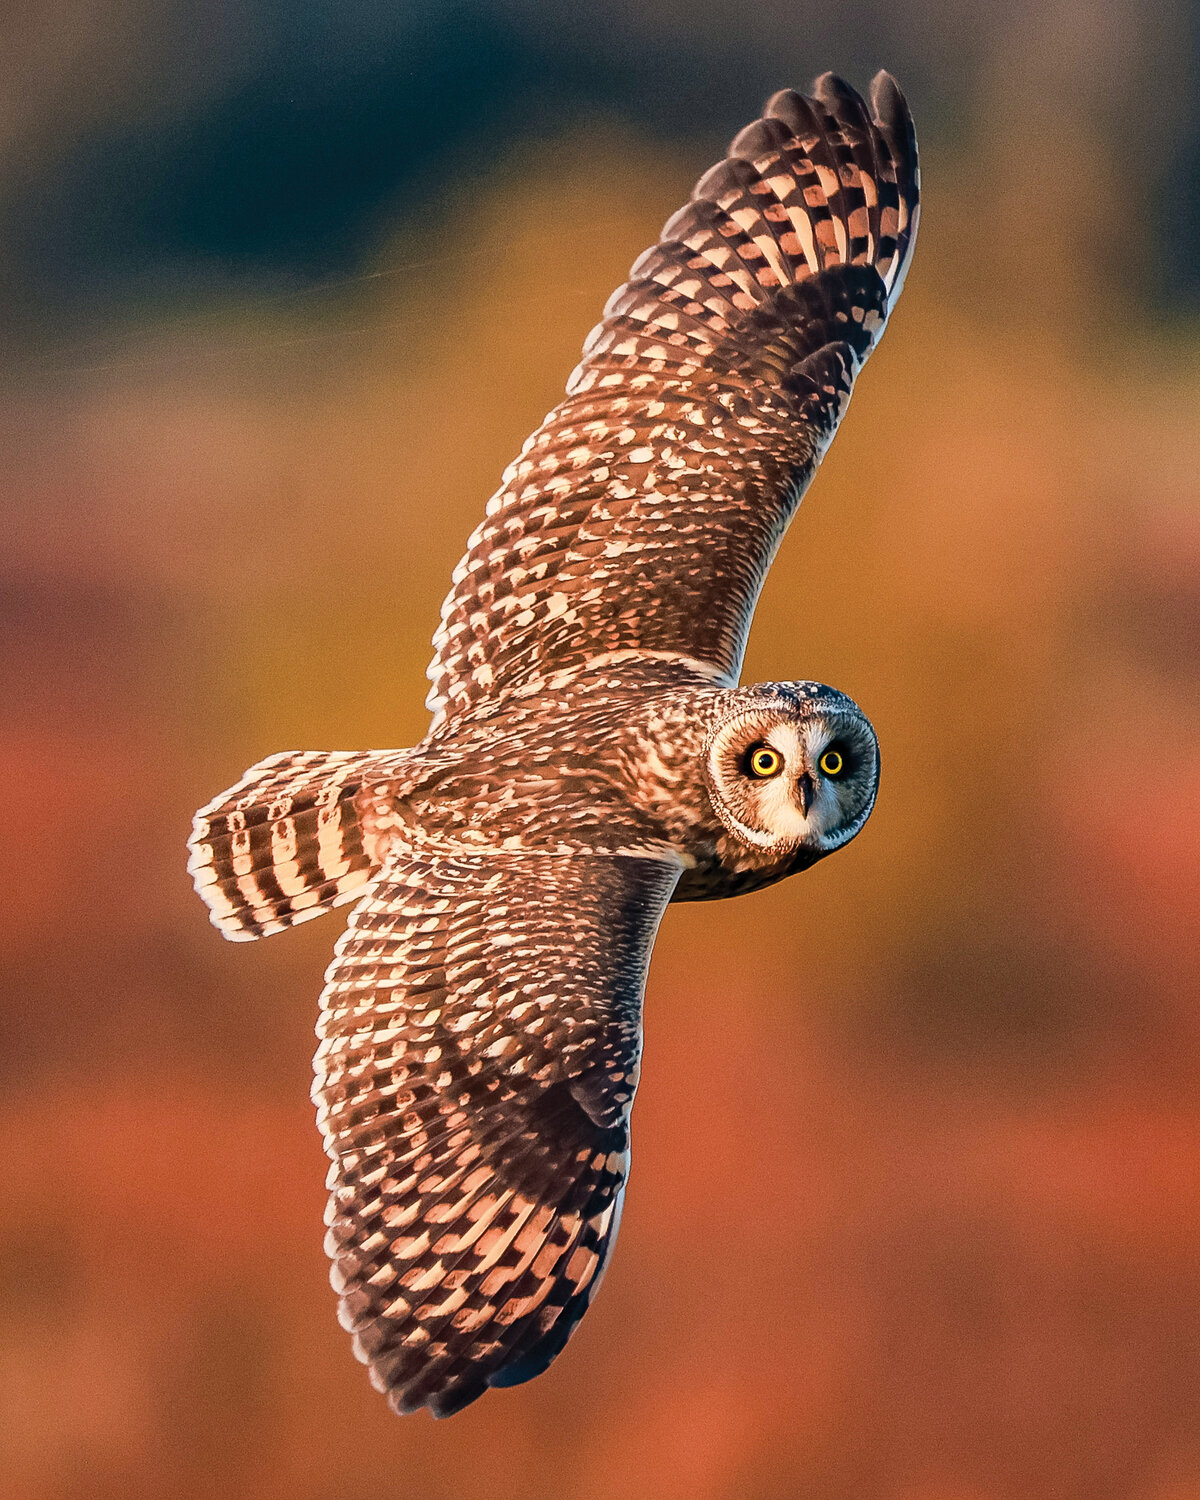 Short-eared owls have returned to the Ridgefield National Wildlife Refuge. The migrational owl species is a sight to see and draws large crowds of bird enthusiasts during the evenings at the River "S" Unit of the refuge. Photographed Nov. 14.